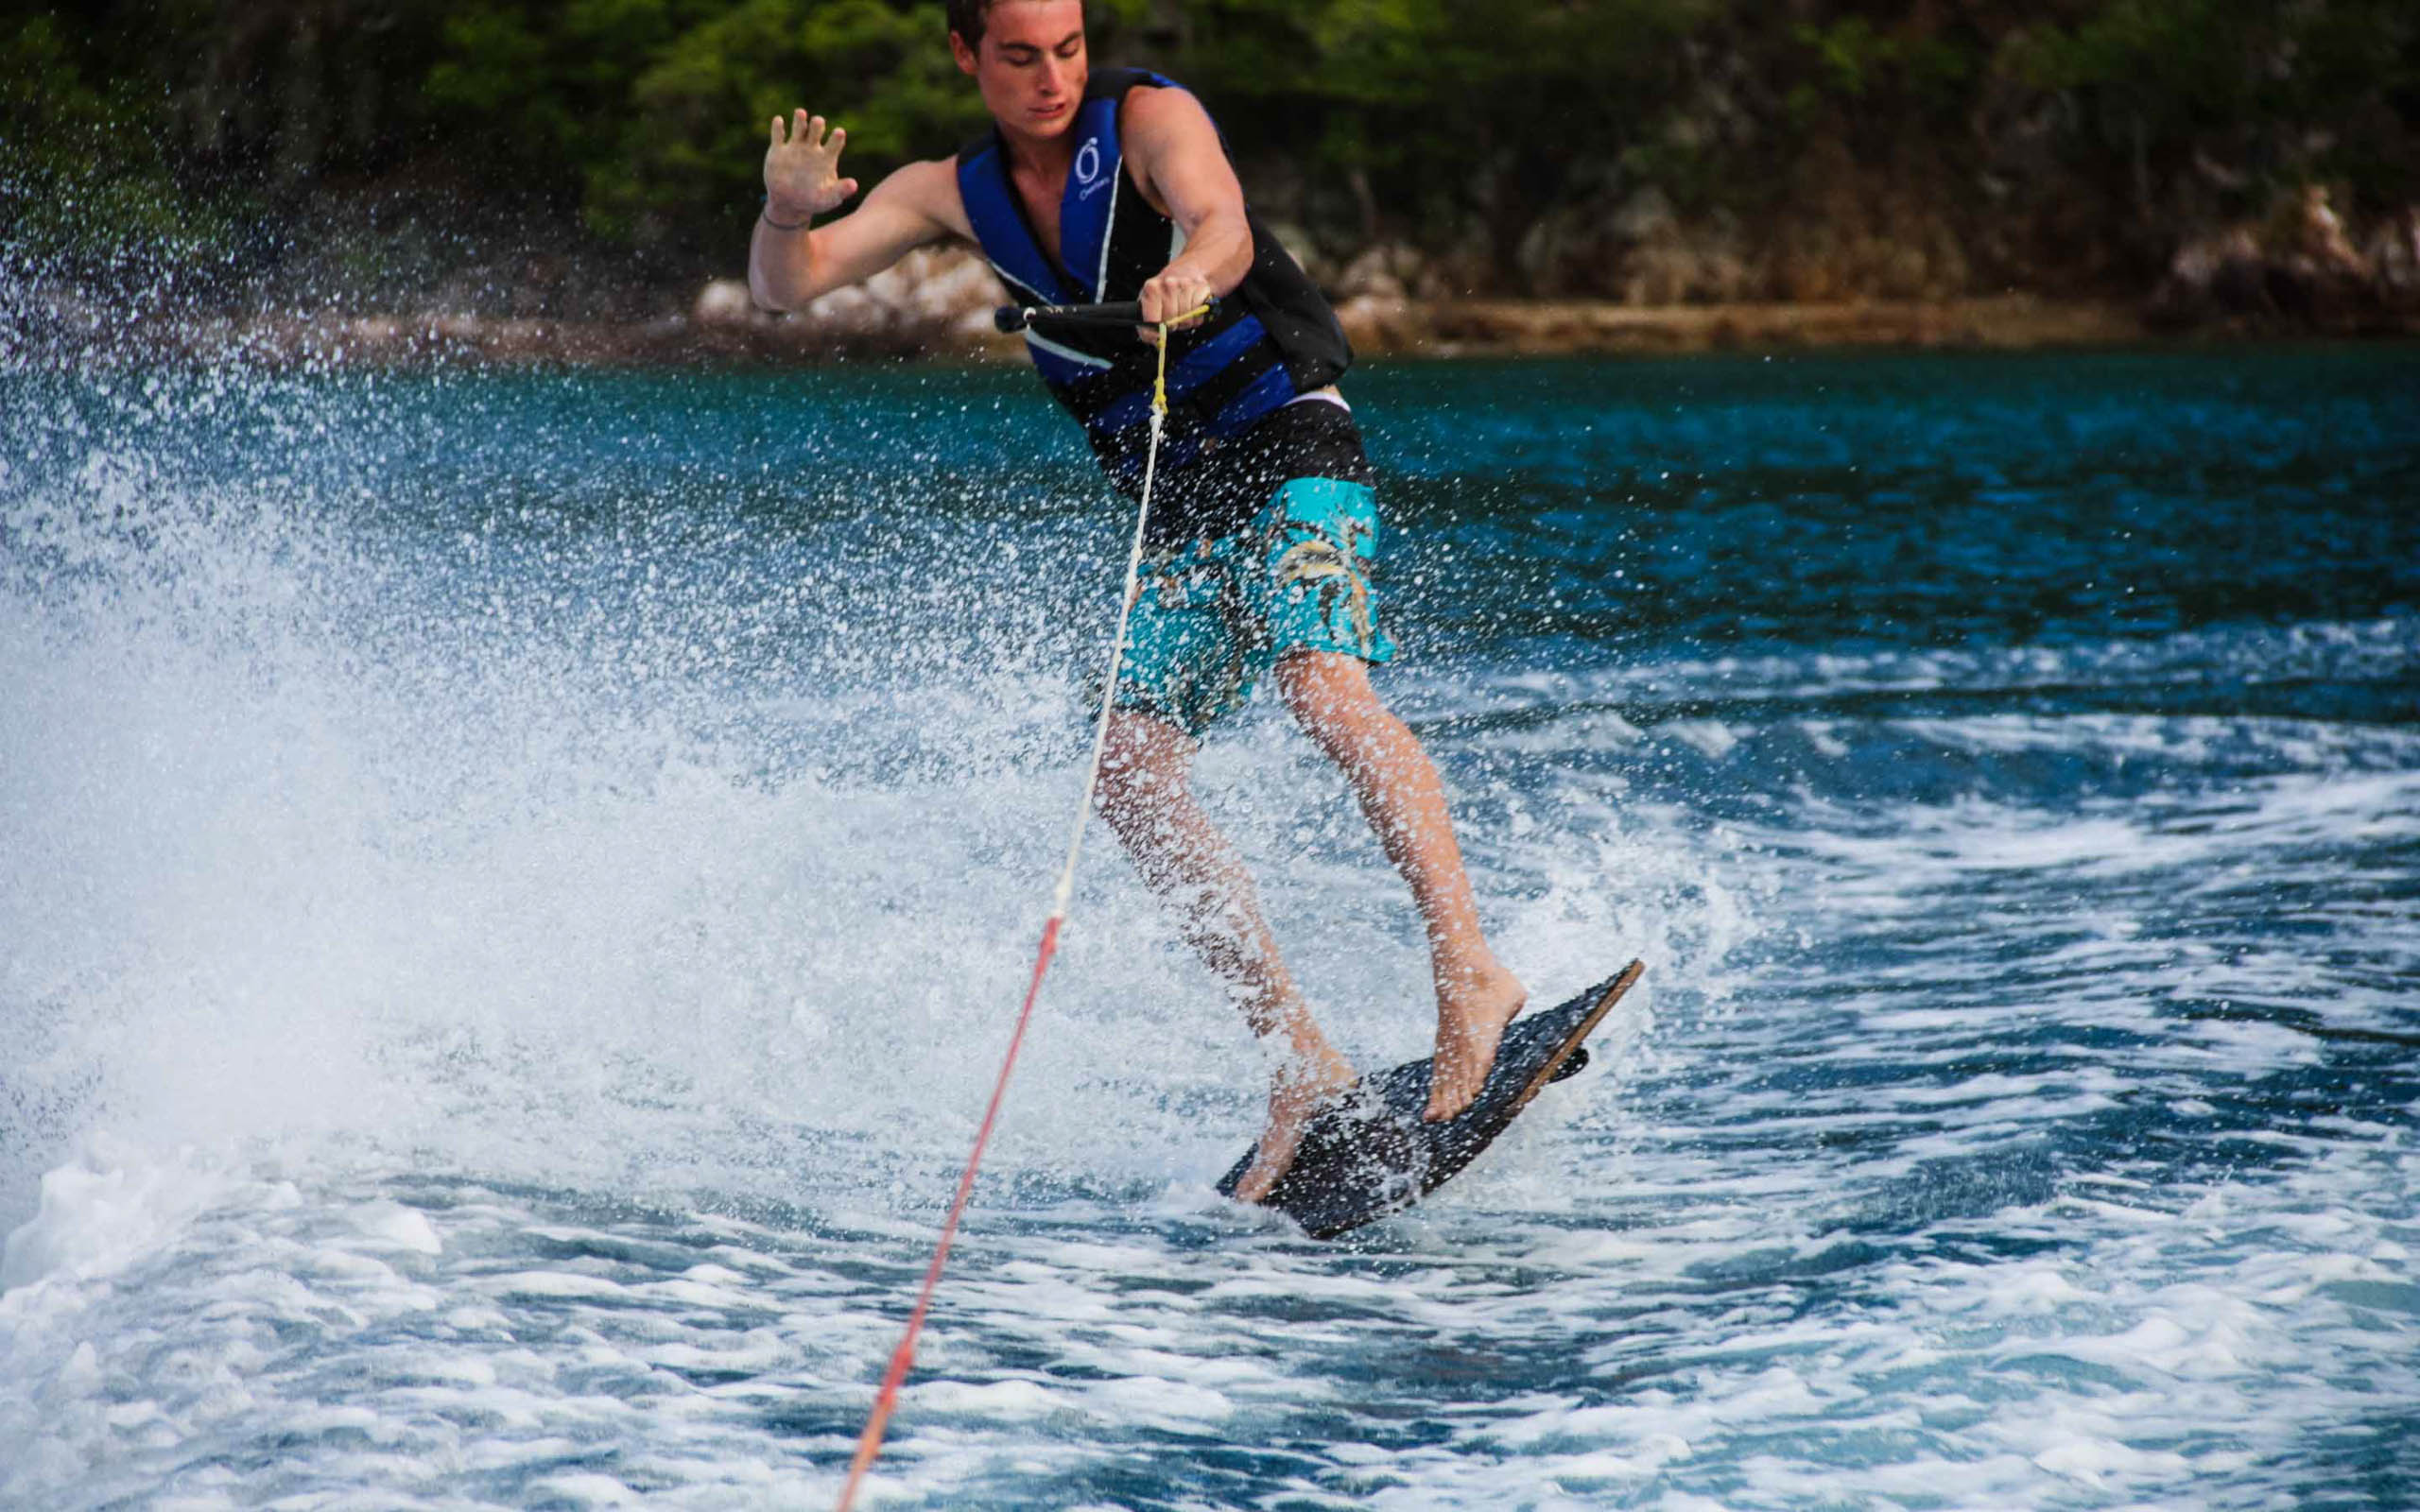 A man is water skiing on a lake.